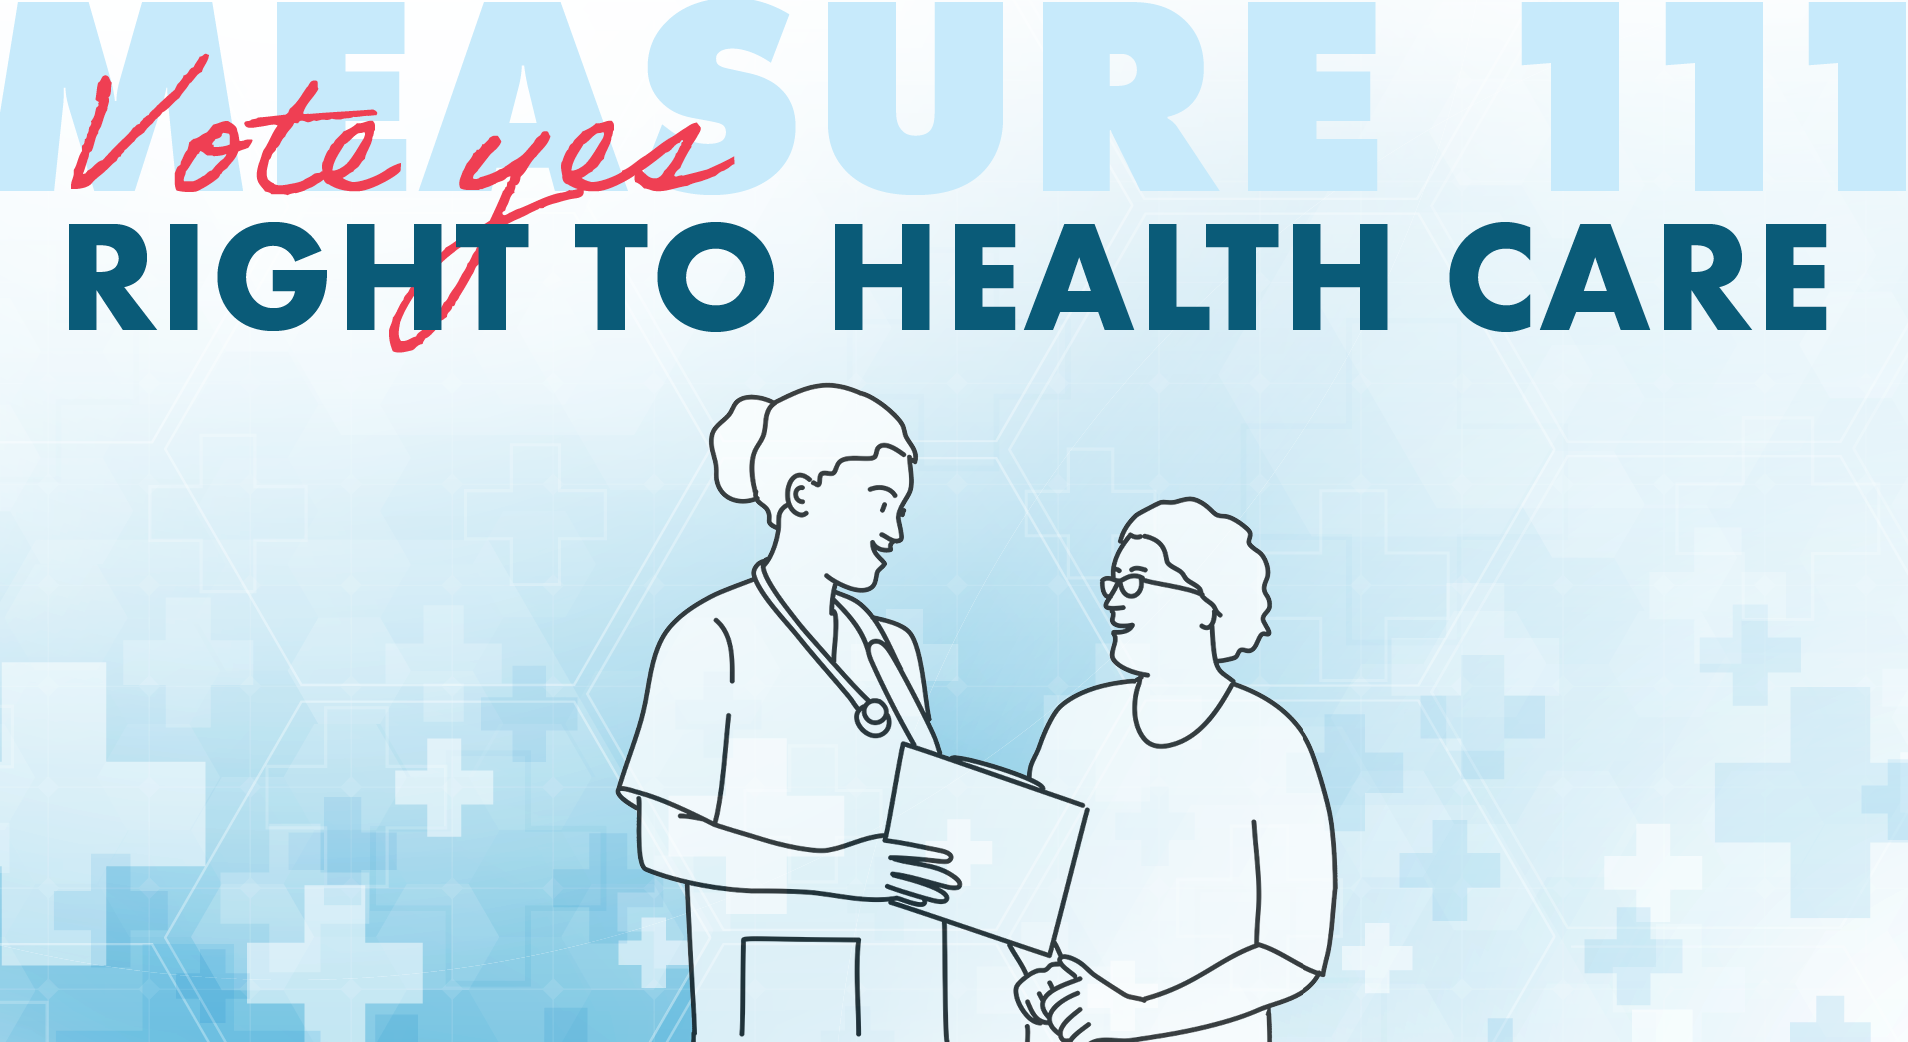 Measure 111: Right to Health Care